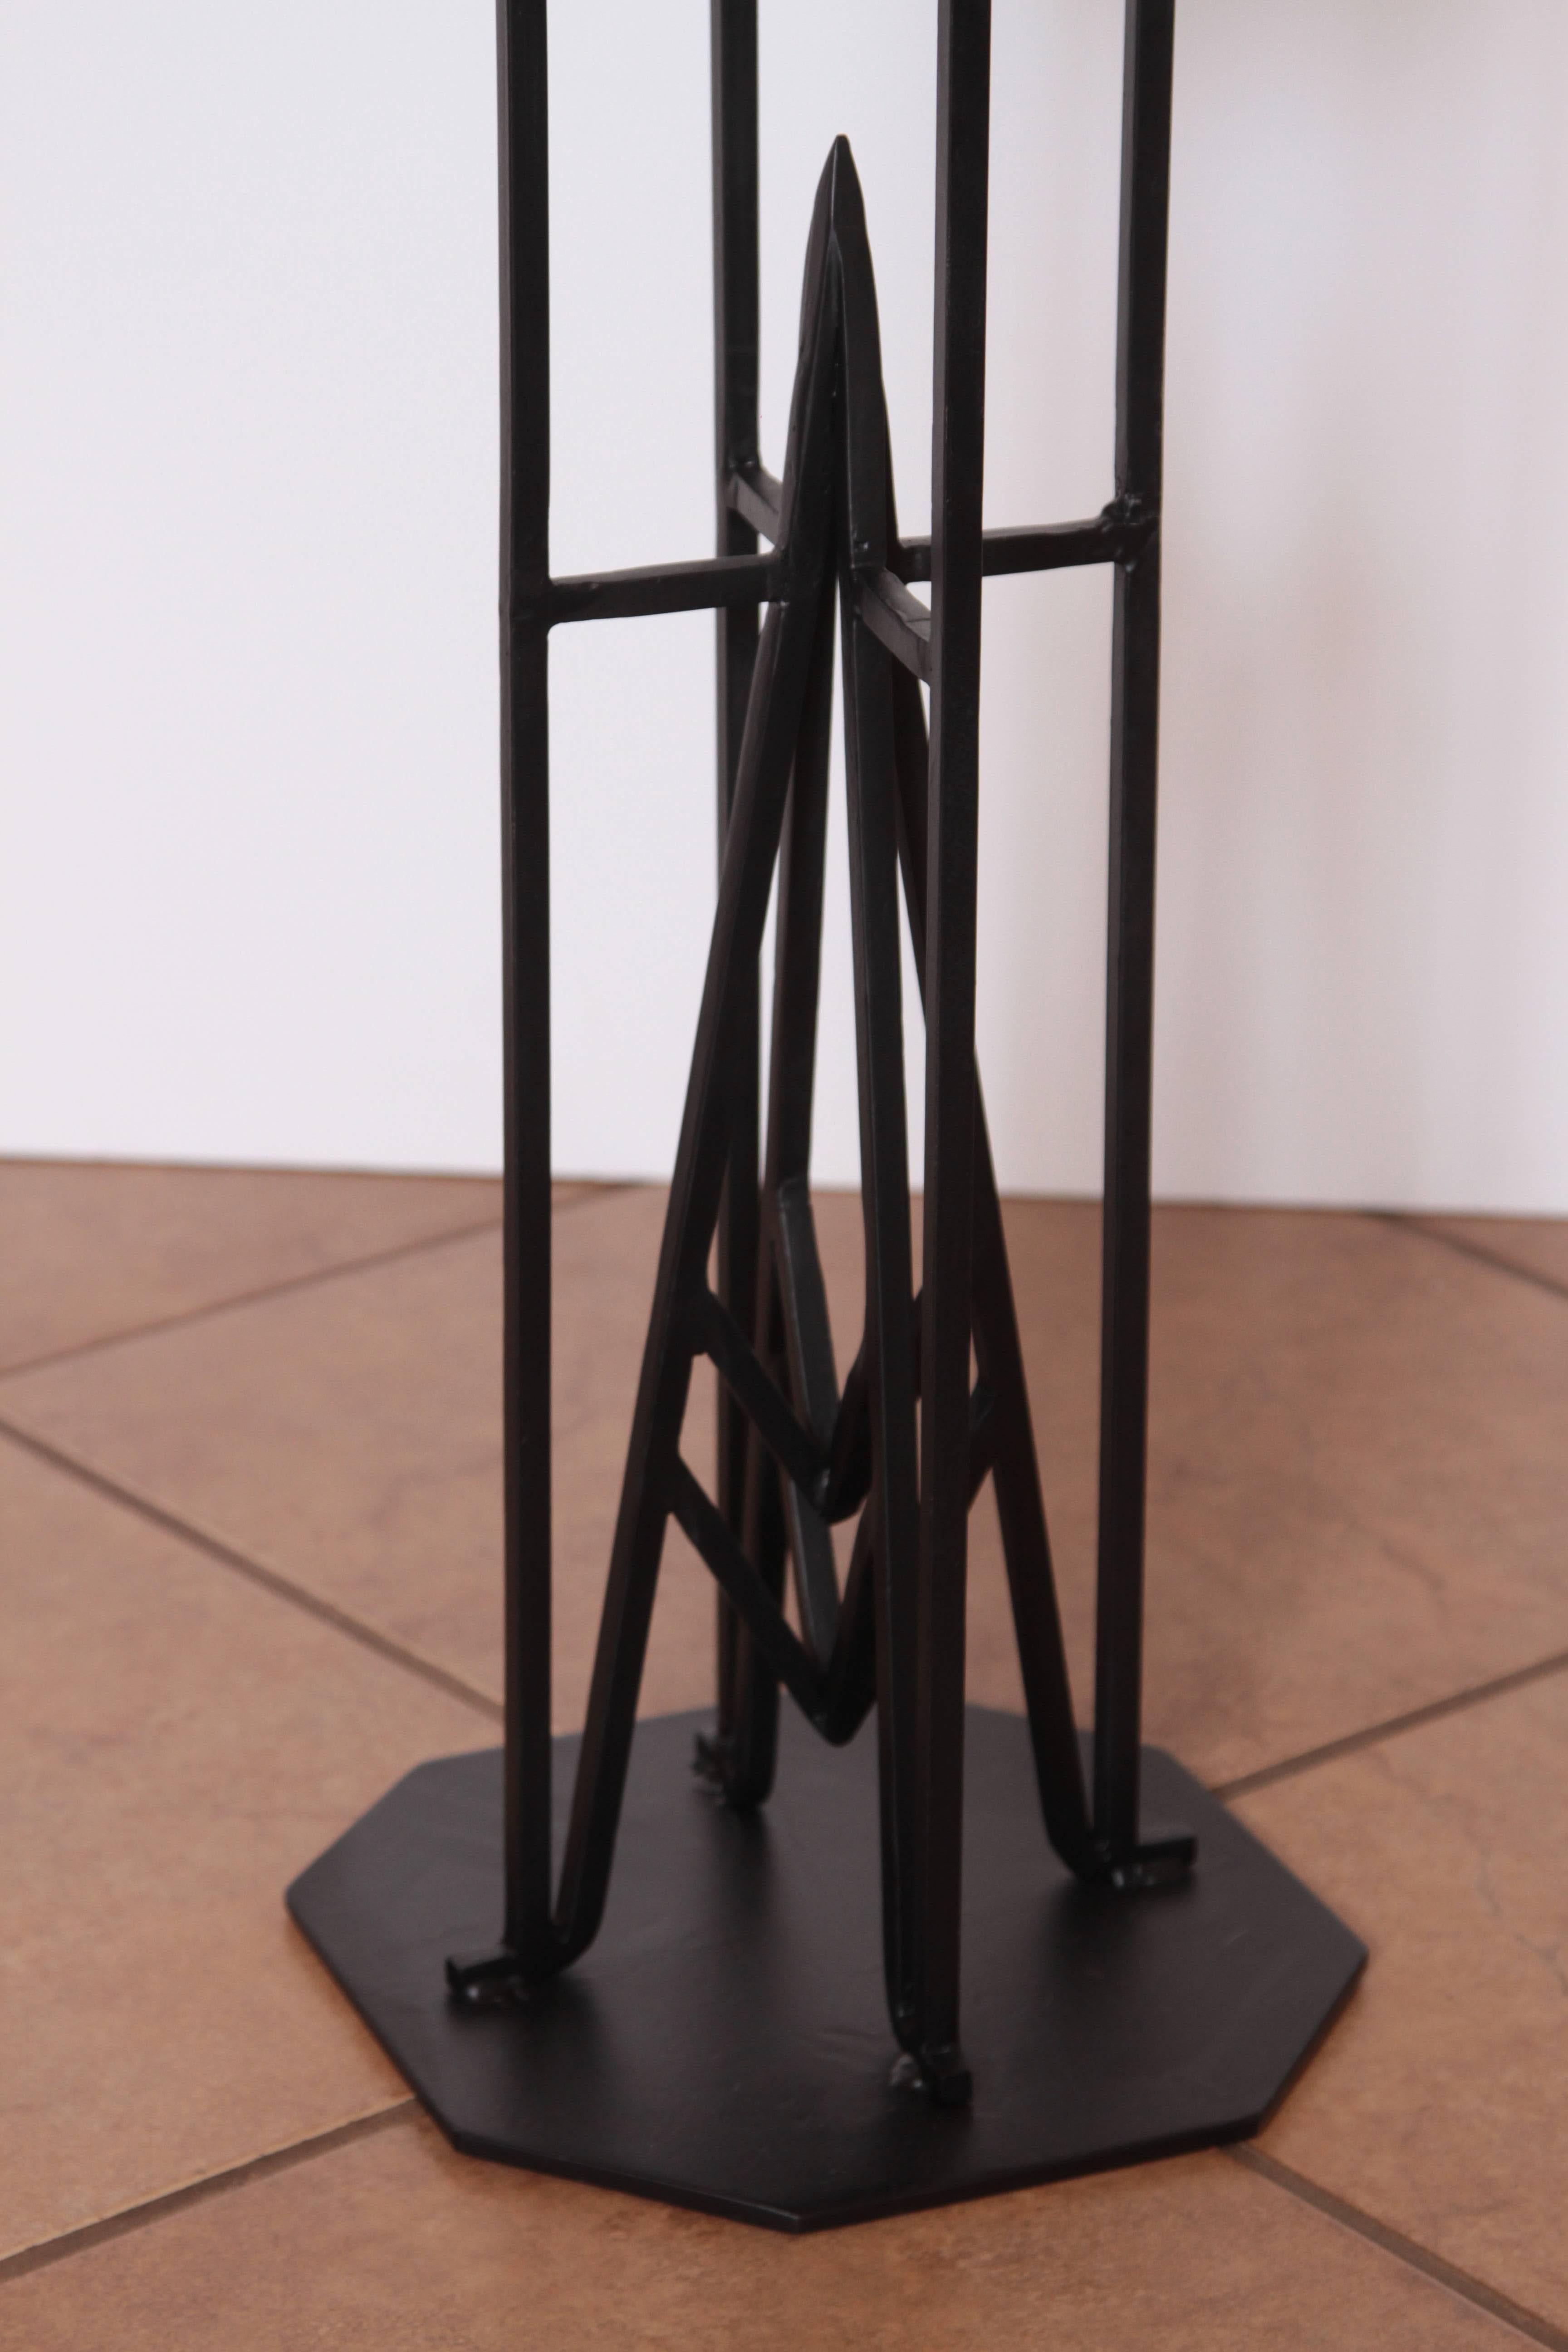 Hand-Crafted Art Deco McArthur / Wright Arizona Biltmore Wrought Iron Plant or Smoking Stand